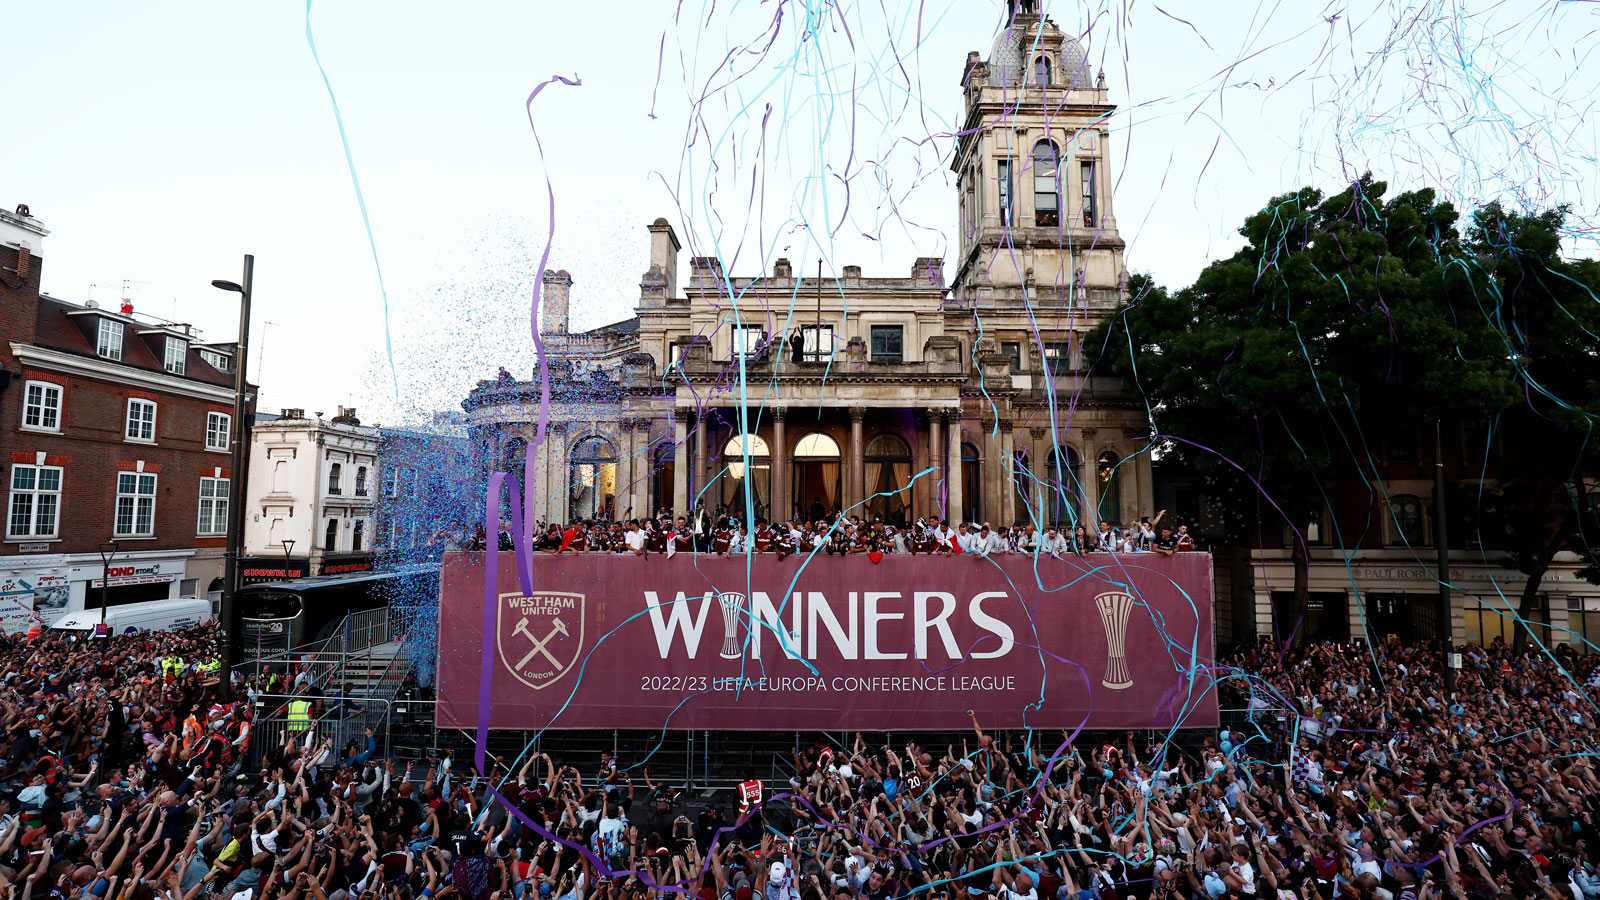 West Ham United supporters at the Victory Parade